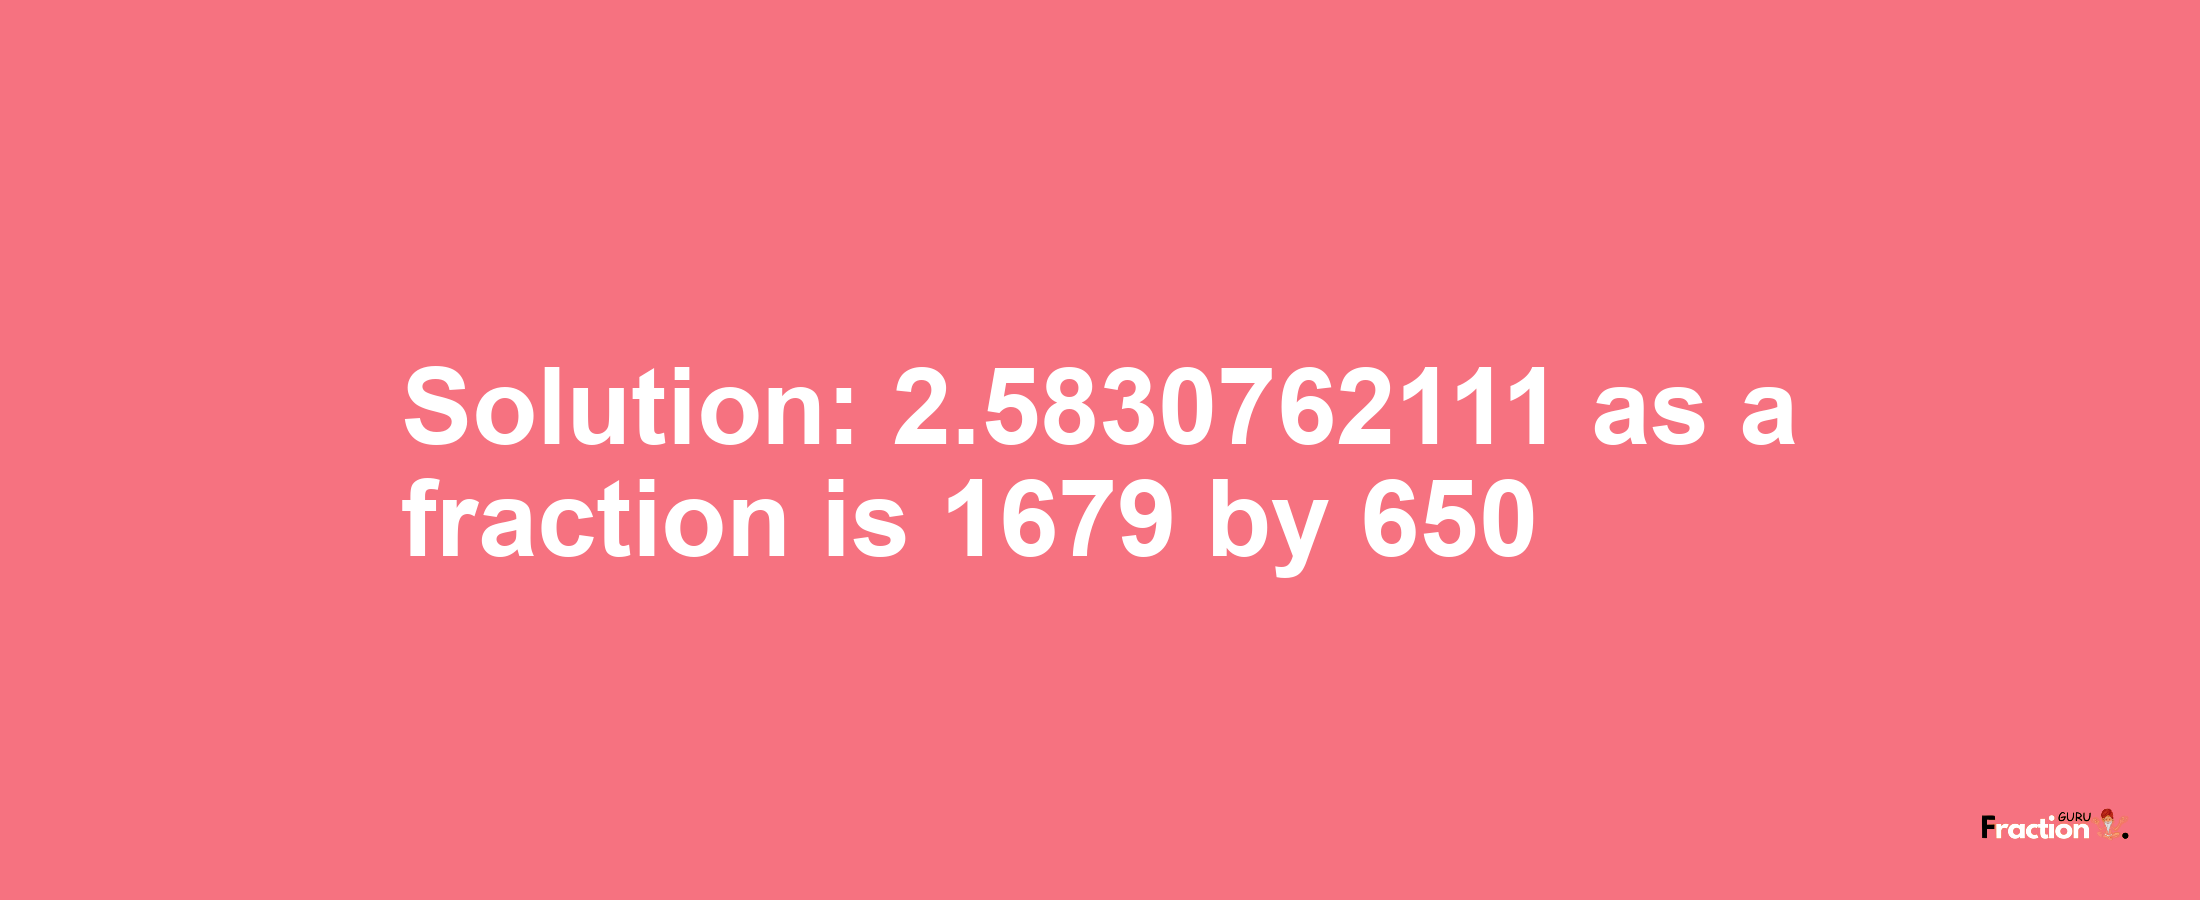 Solution:2.5830762111 as a fraction is 1679/650